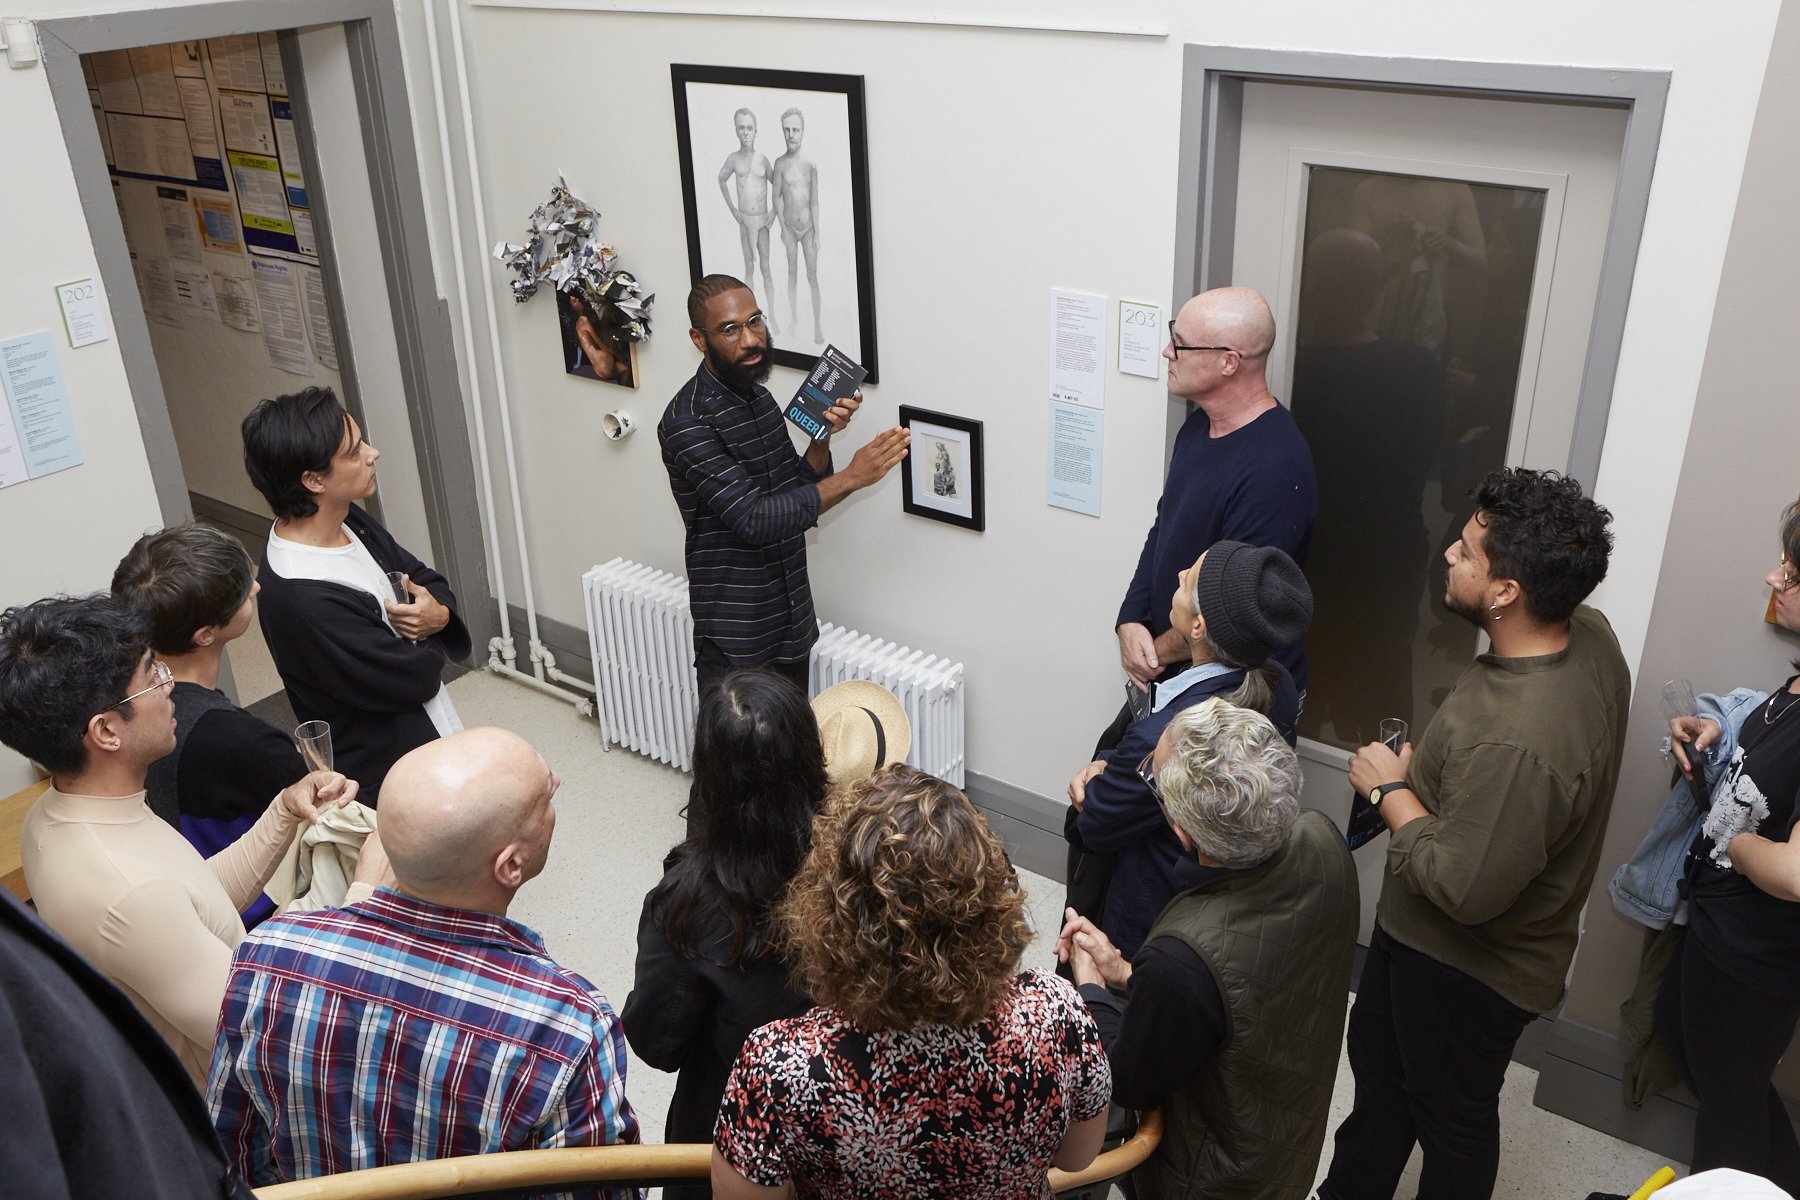 2017-2018 Queer_Art_Mentorship Fellow Justin Allen shares his work at the LGBT Center, where the 2018 Annual Party took place (image by Eric McNatt.jpg